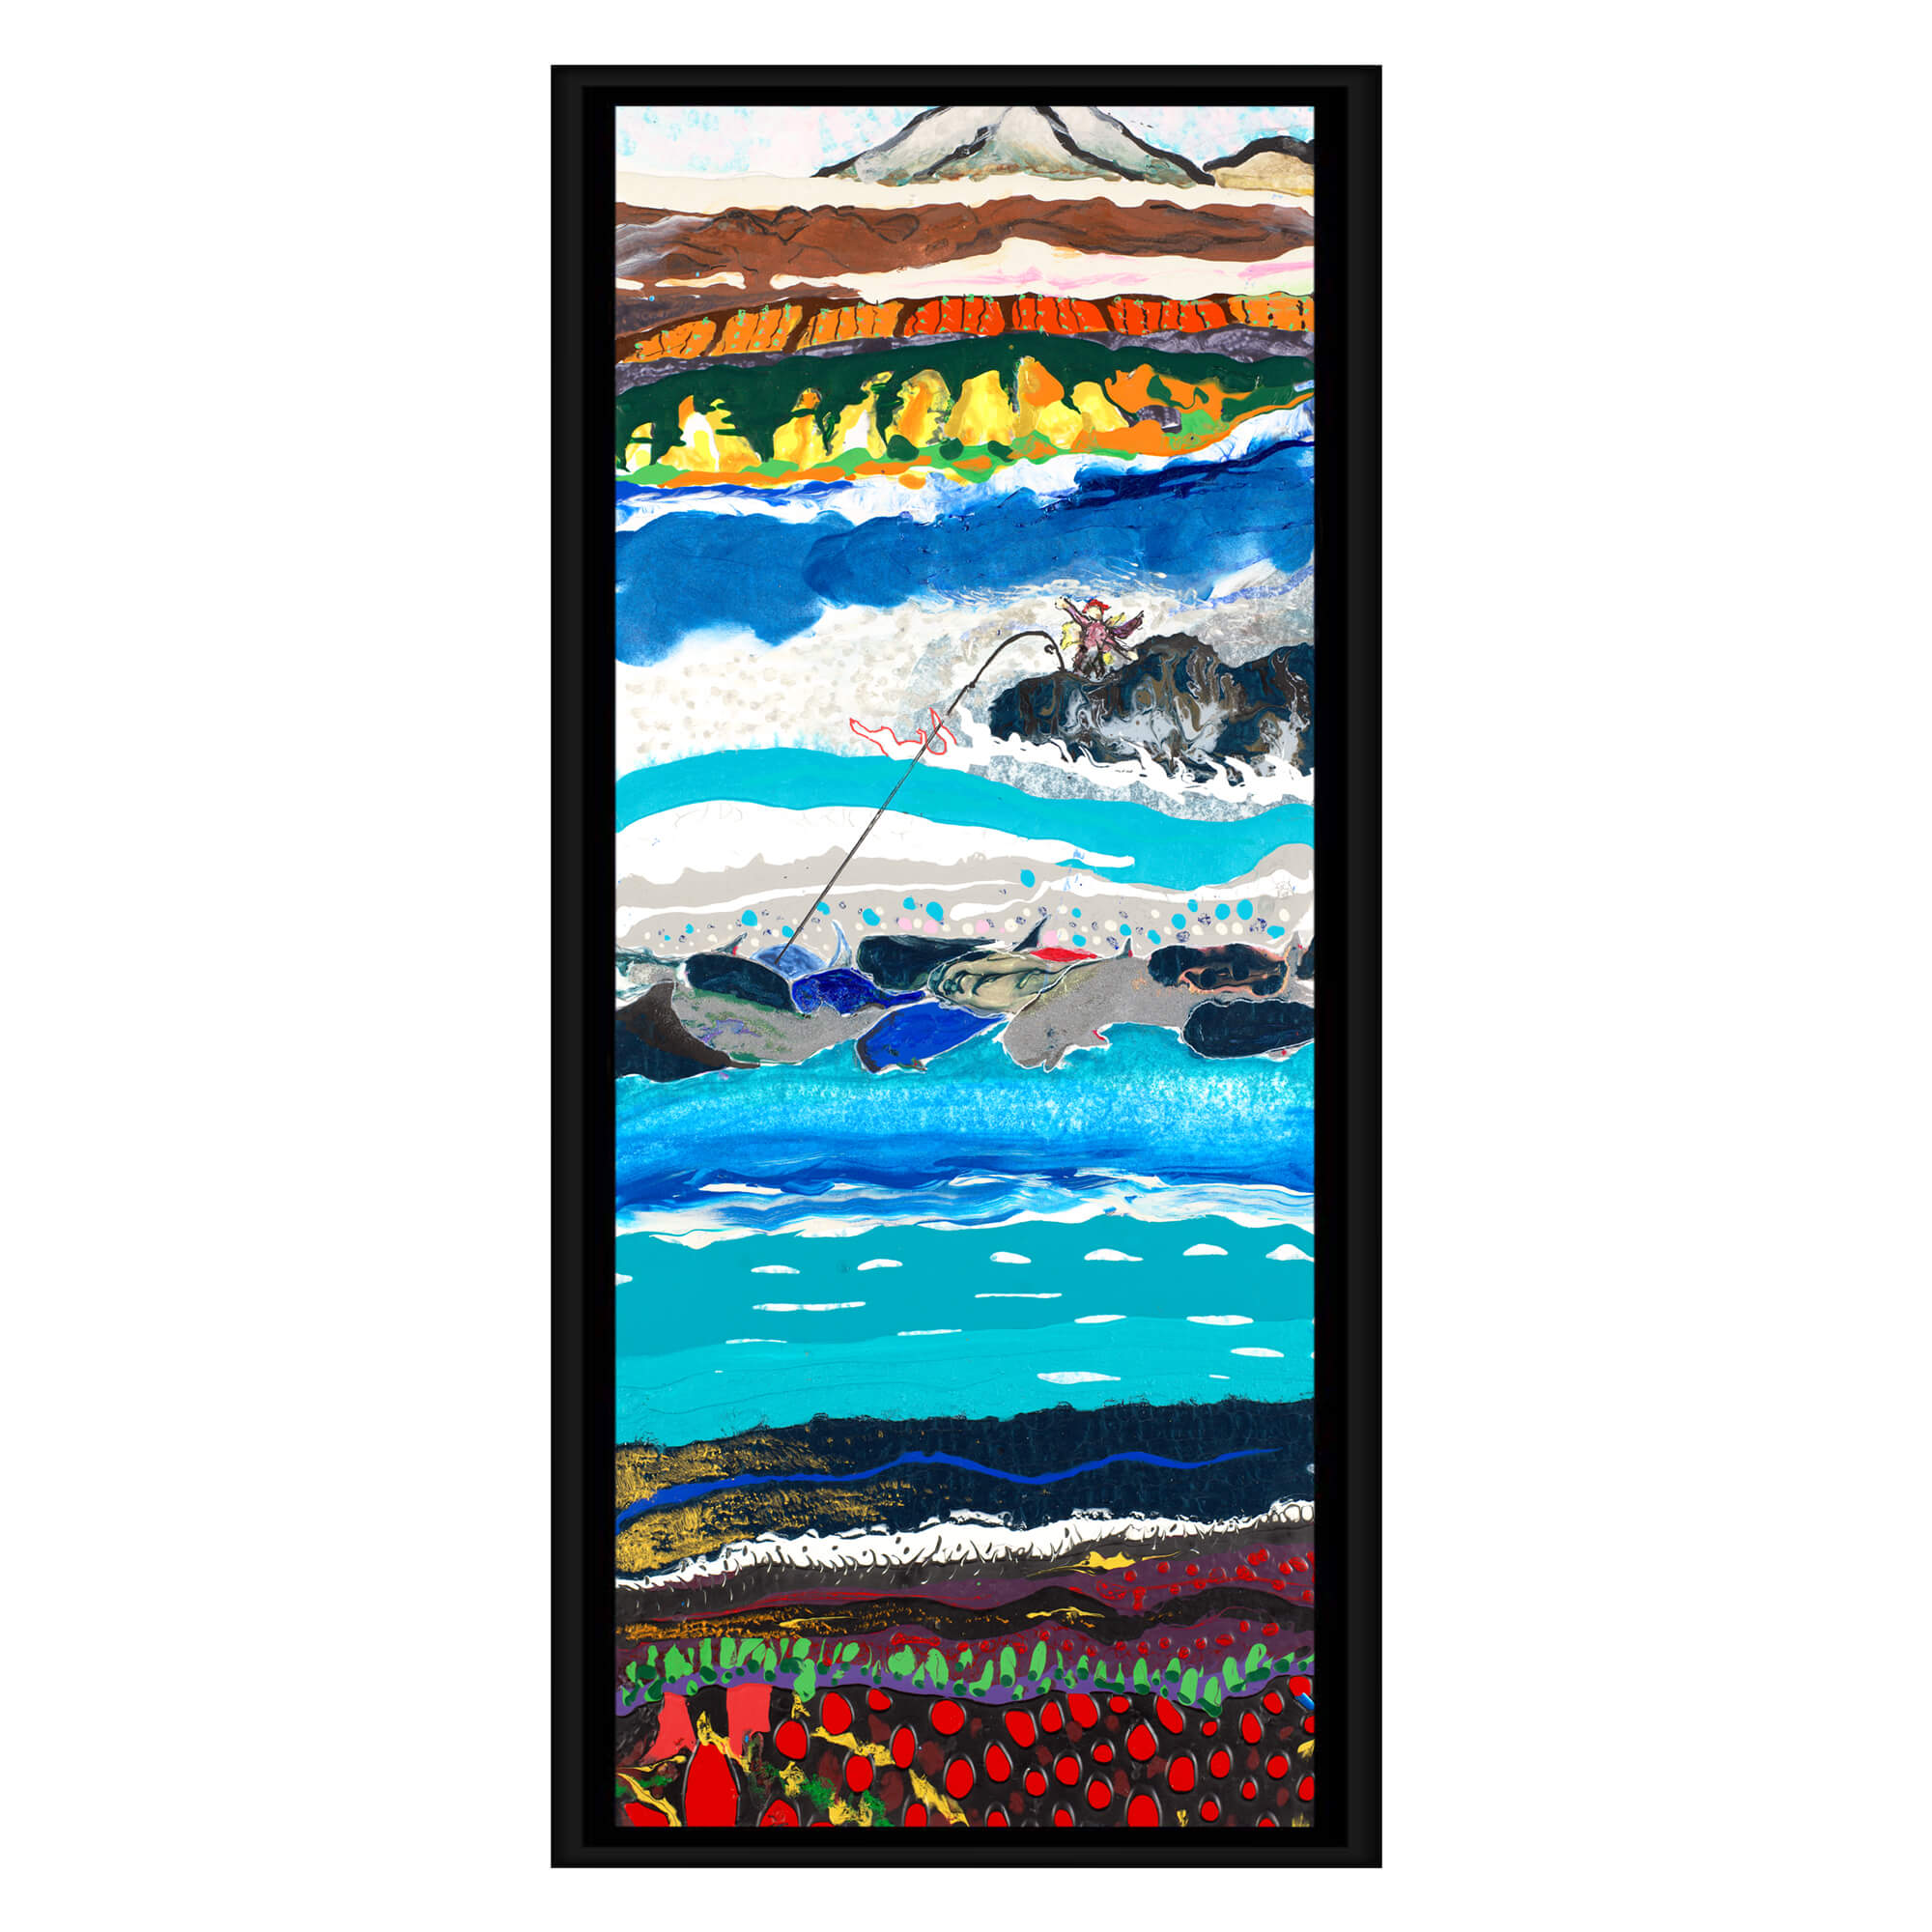 canvas art print of the ocean with colorful plants and large crashing waves by Hawaii artist Robert Hazzard